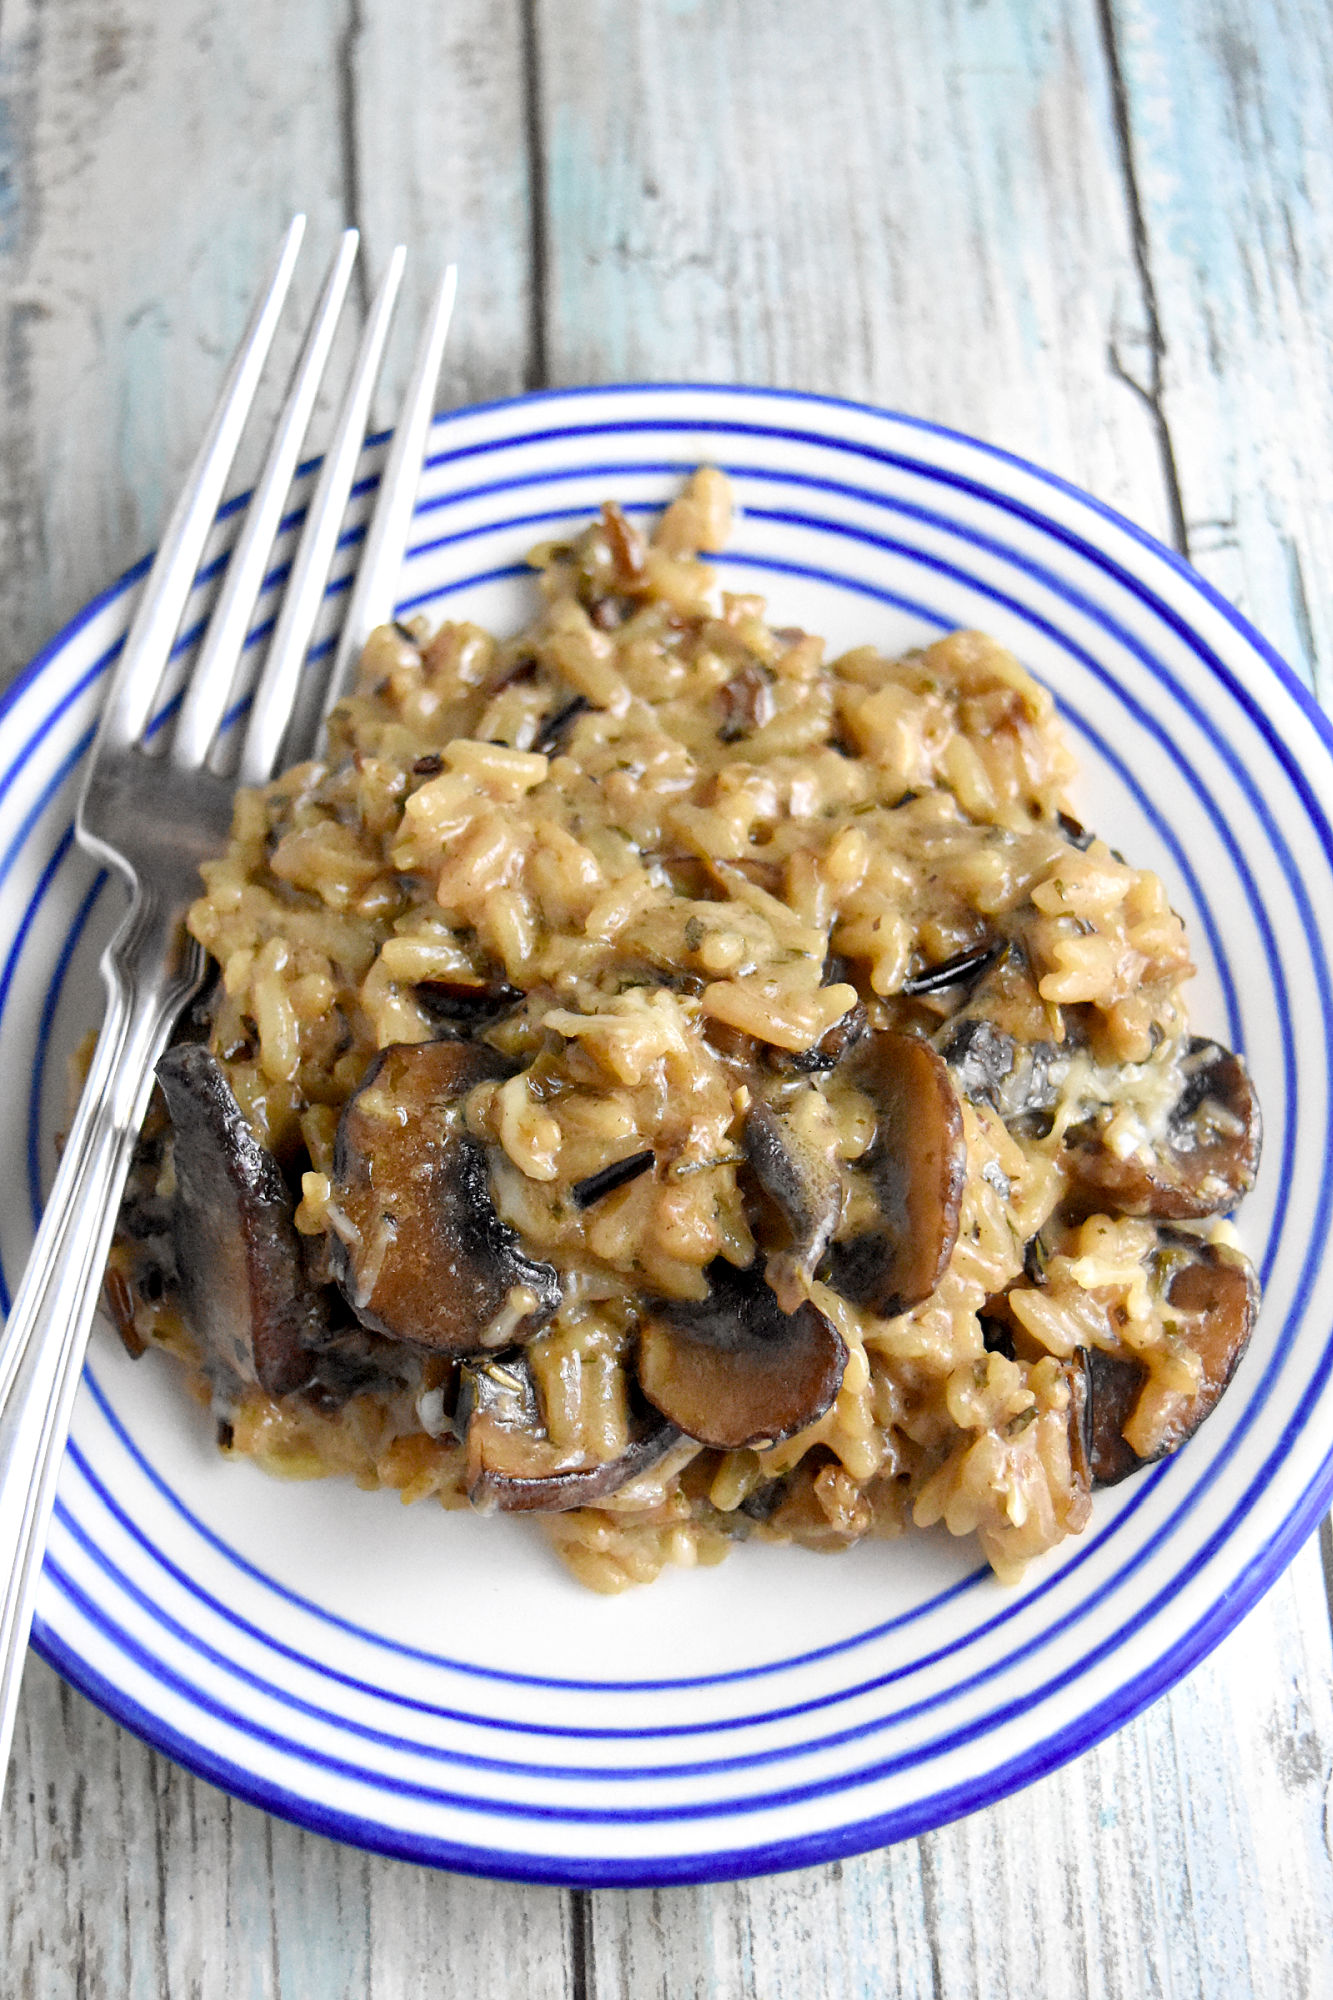 Mushroom and Wild Rice Casserole is packed with mushrooms and cheese.  It’s a quick recipe using boxed rice pilaf mix and cream of mushroom soup.  But there’s no denying it tastes totally homemade. #HolidaySideDishes #ricepilaf #bakedrice #cheesyrice #easyrecipe #sidedish #HolidayRecipe